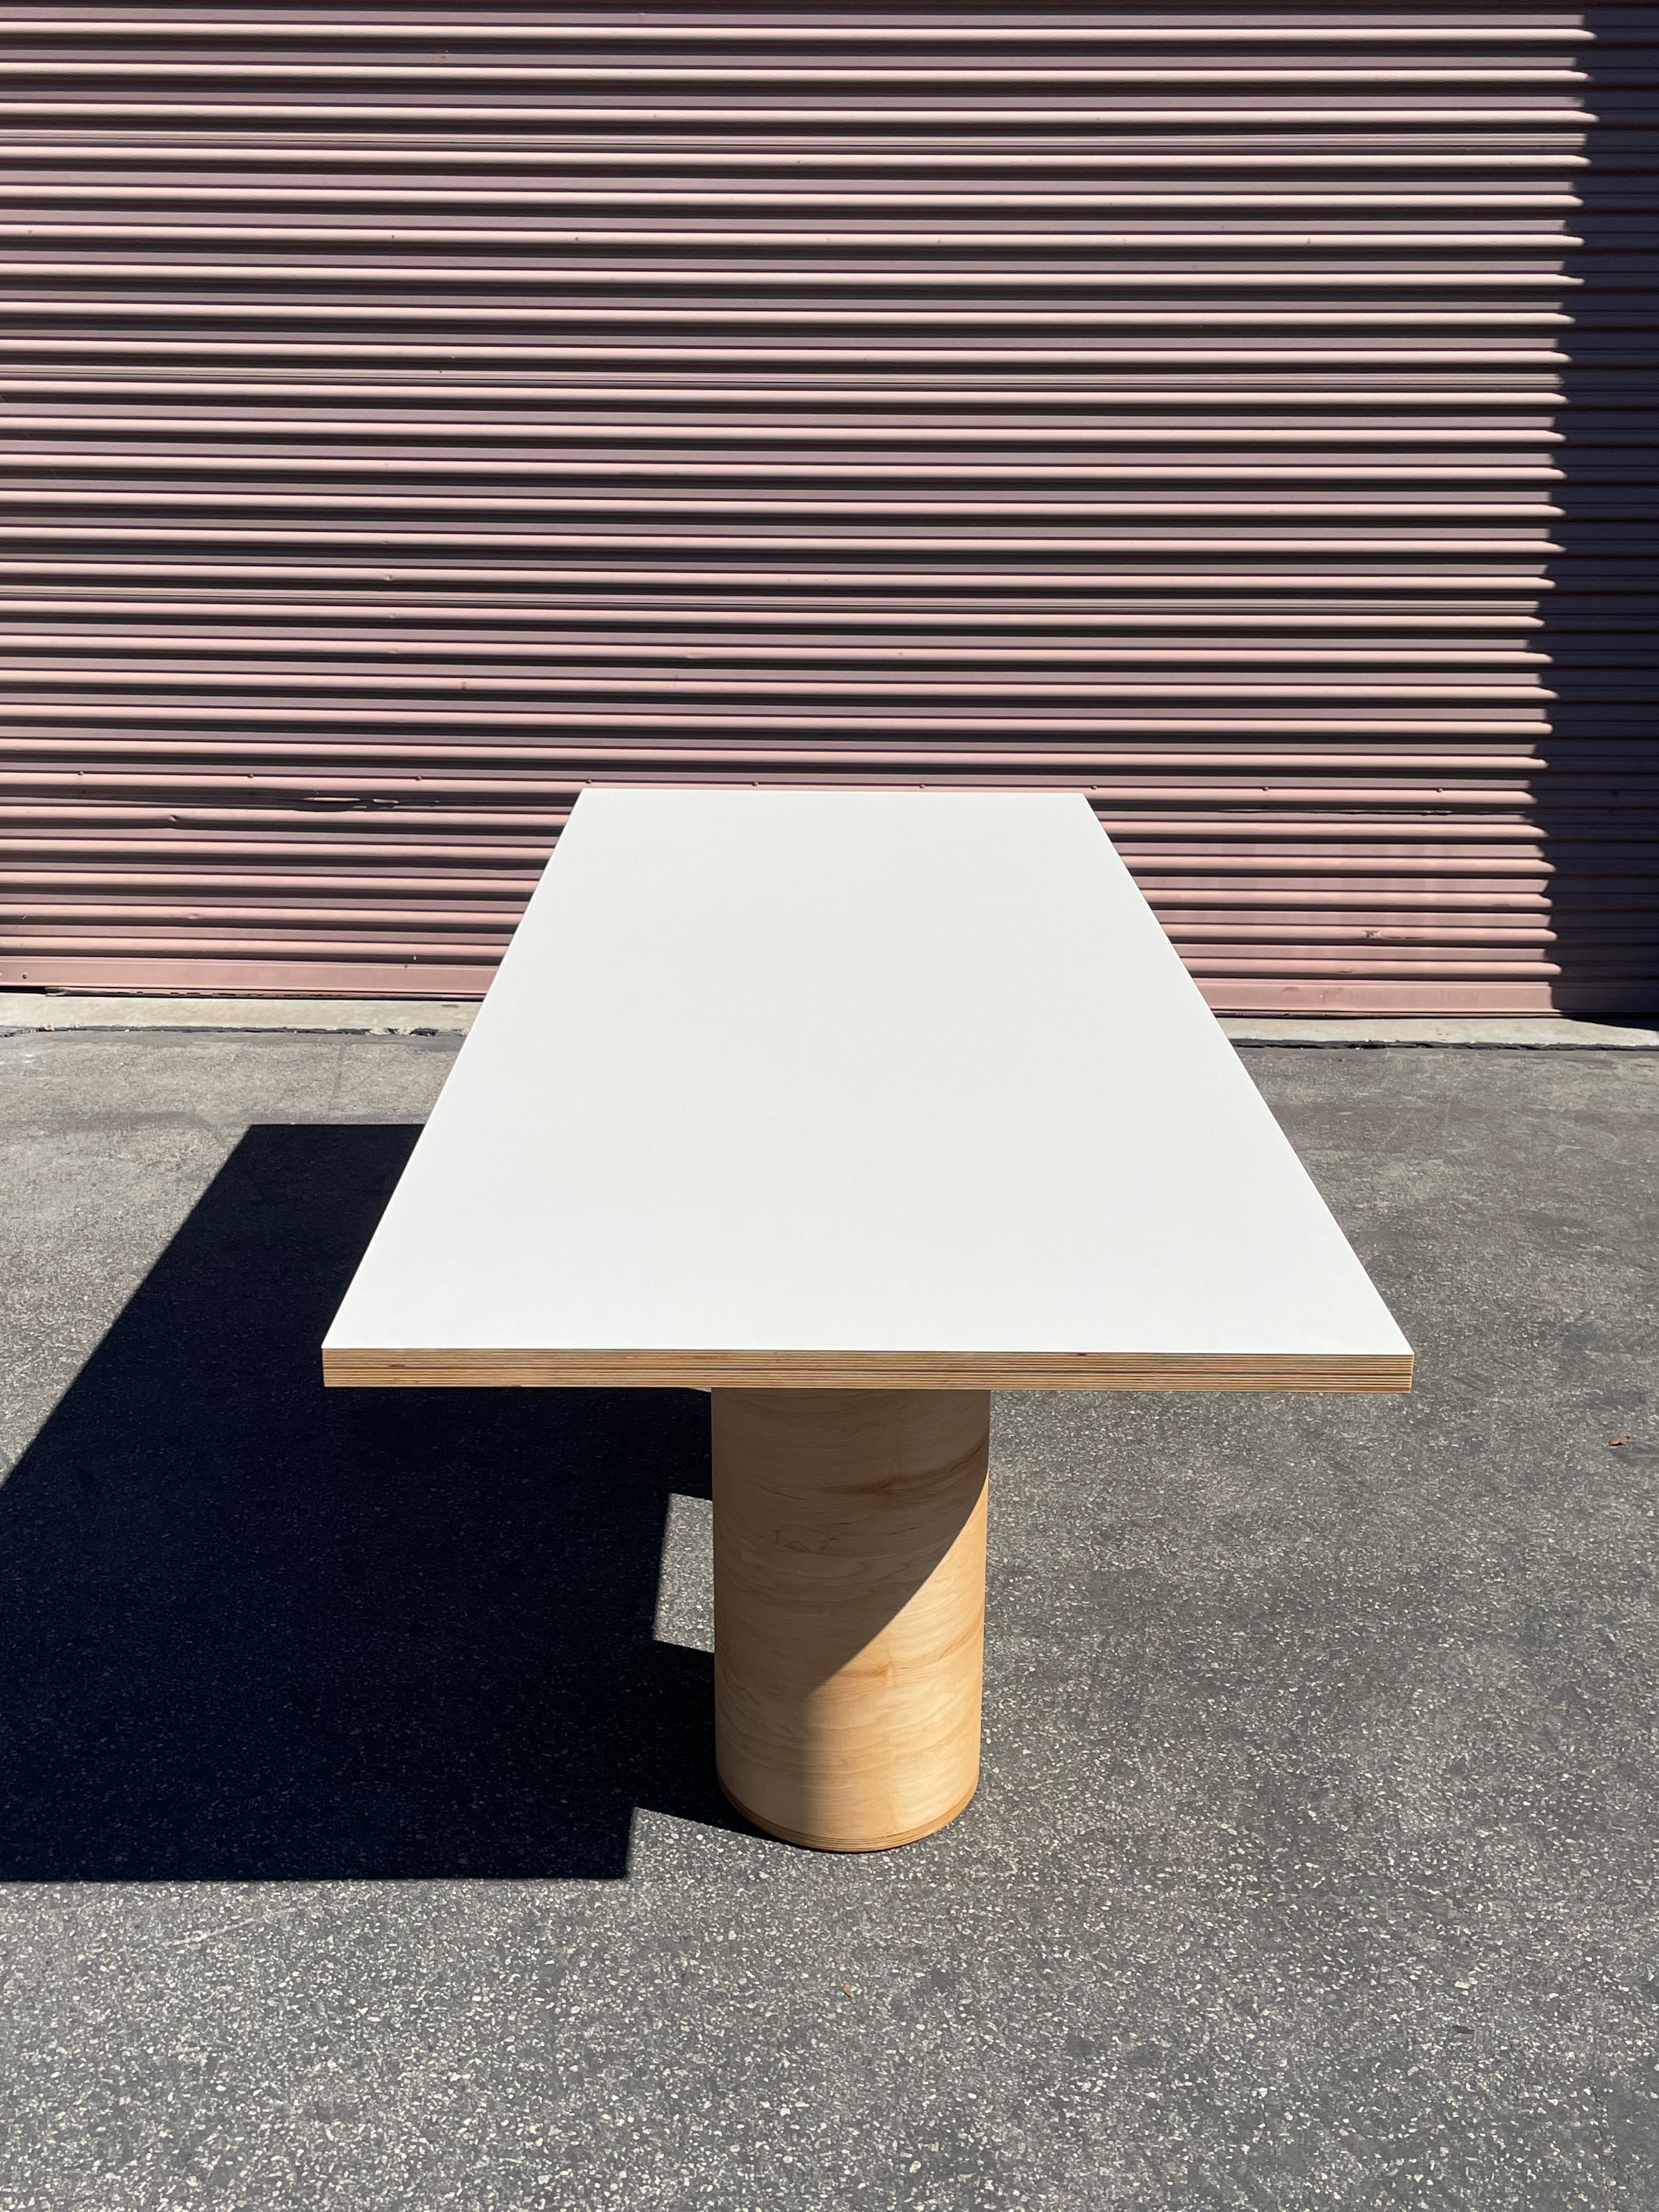  Three Cylinder Rectangle Table product image 2